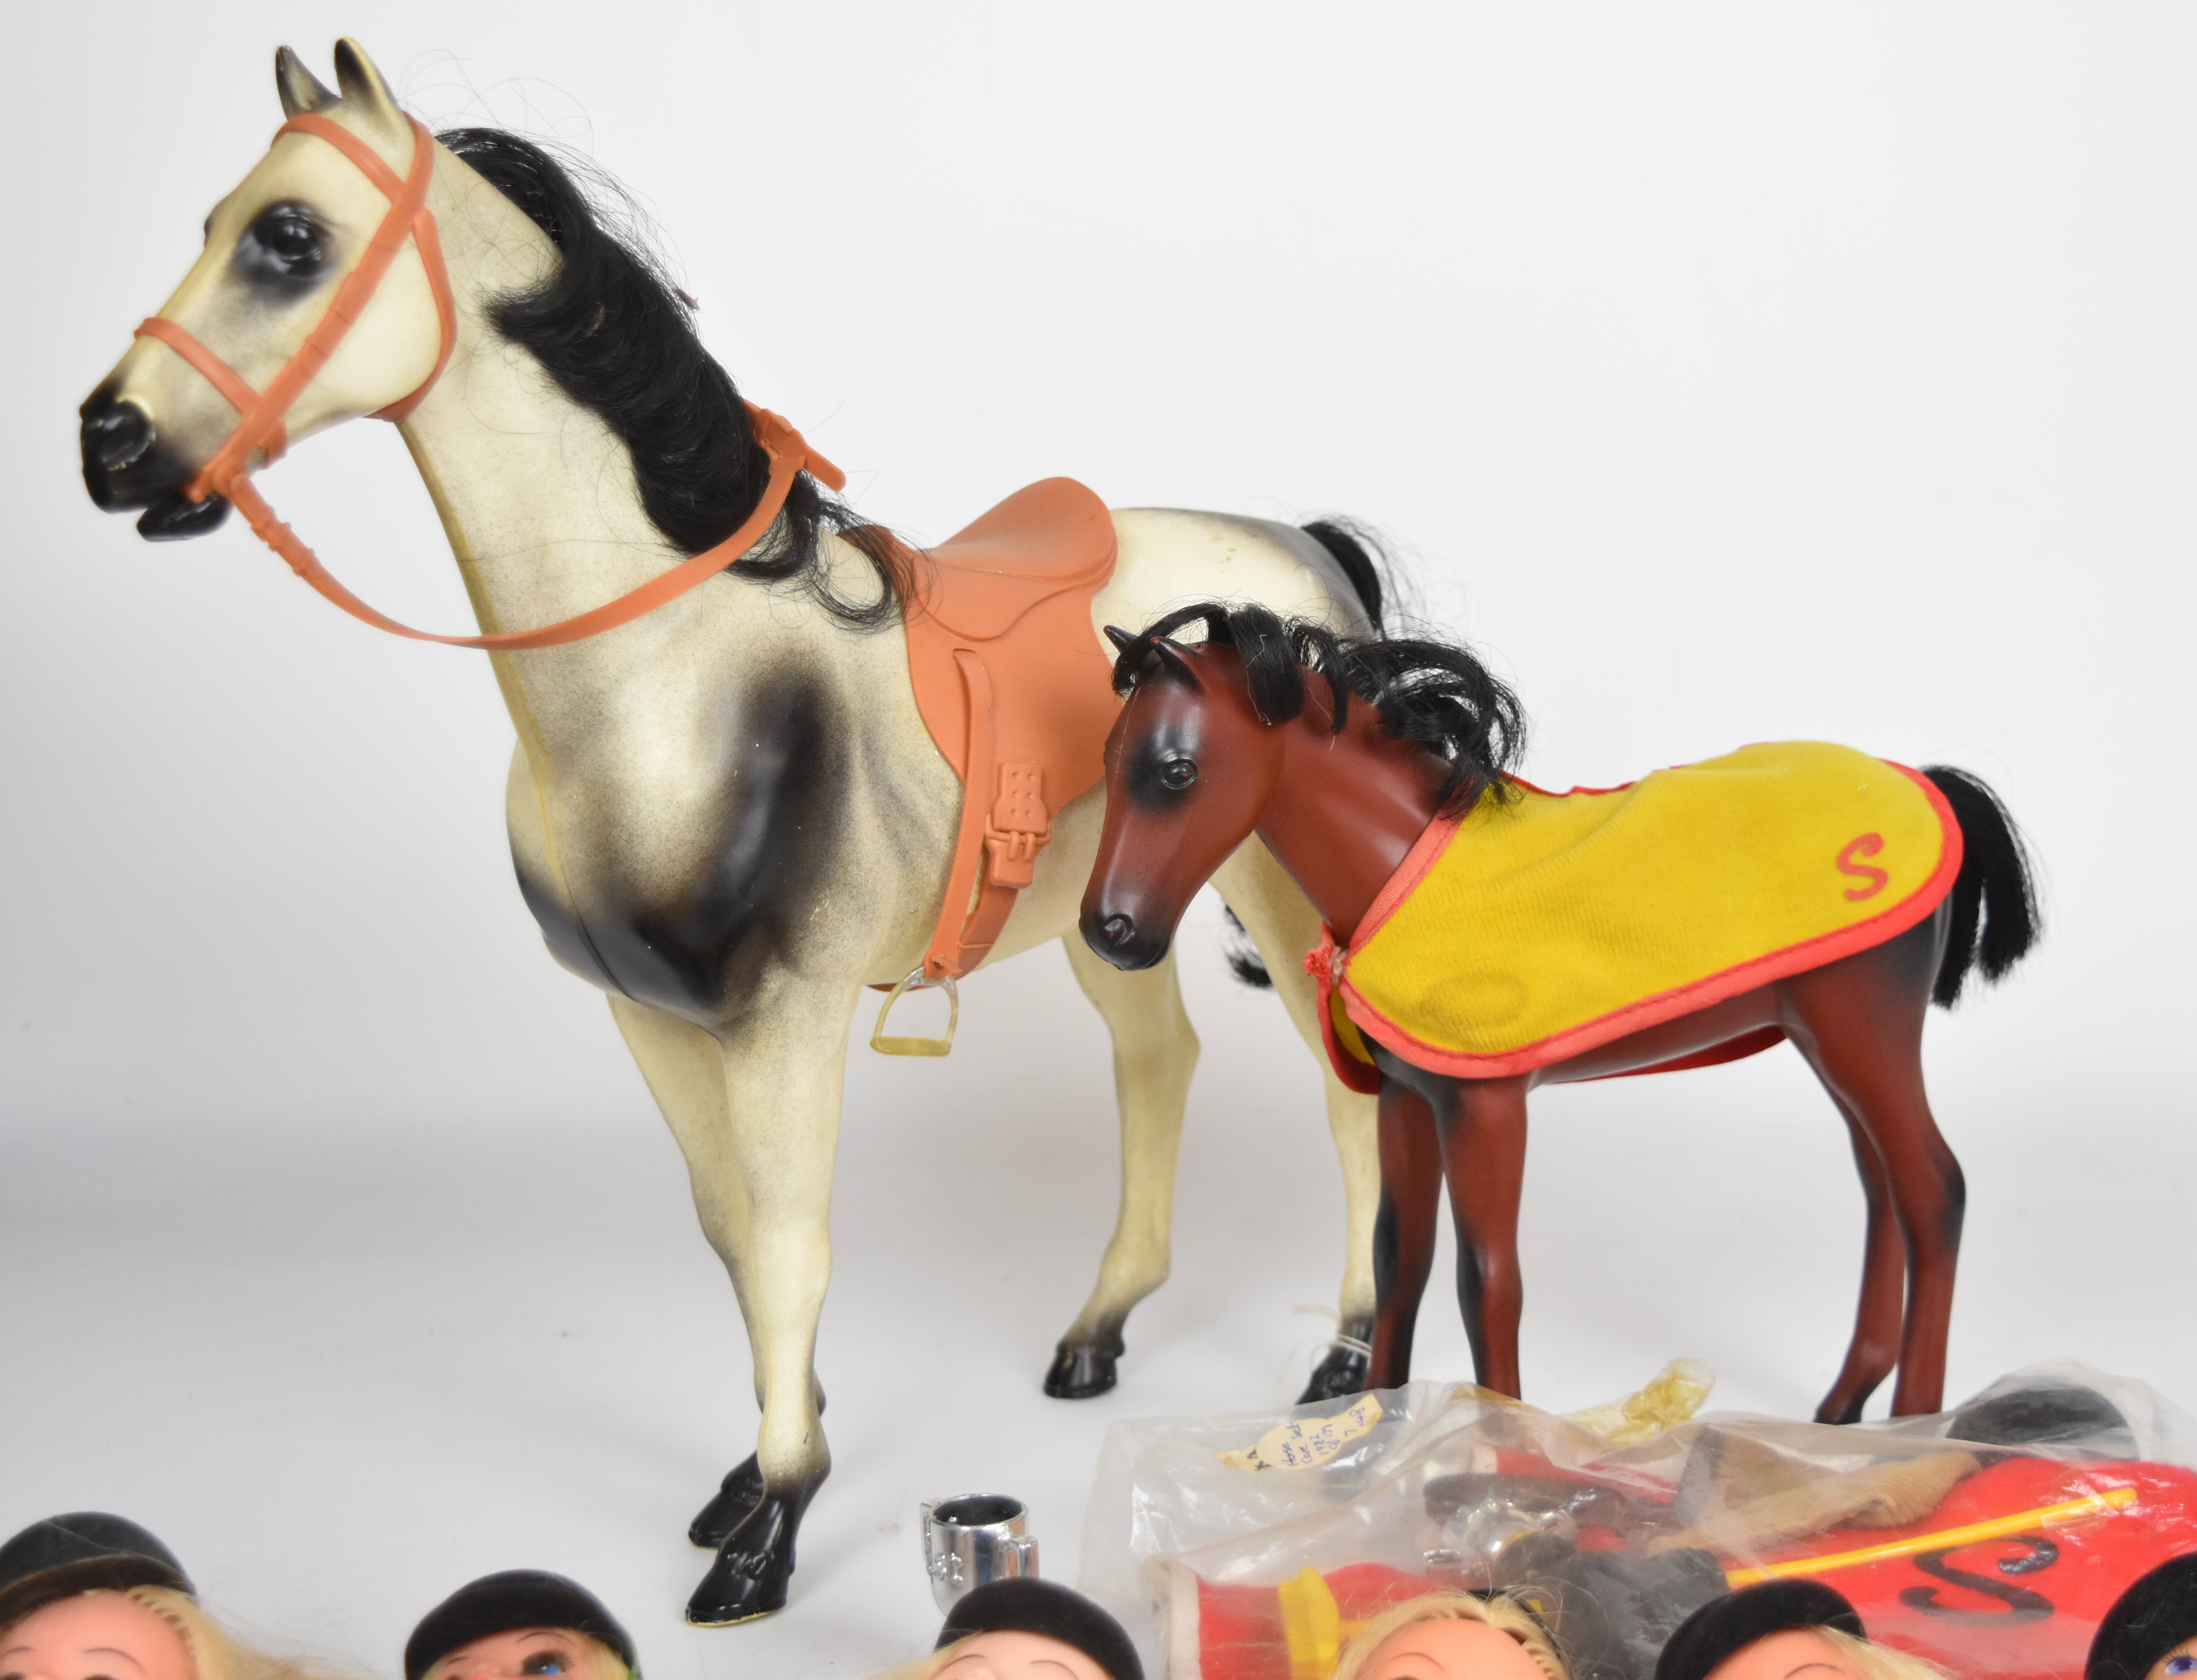 Ten vintage Sindy dolls by Pedigree dressed in 1980's equestrian outfits together with two horses - Image 4 of 4